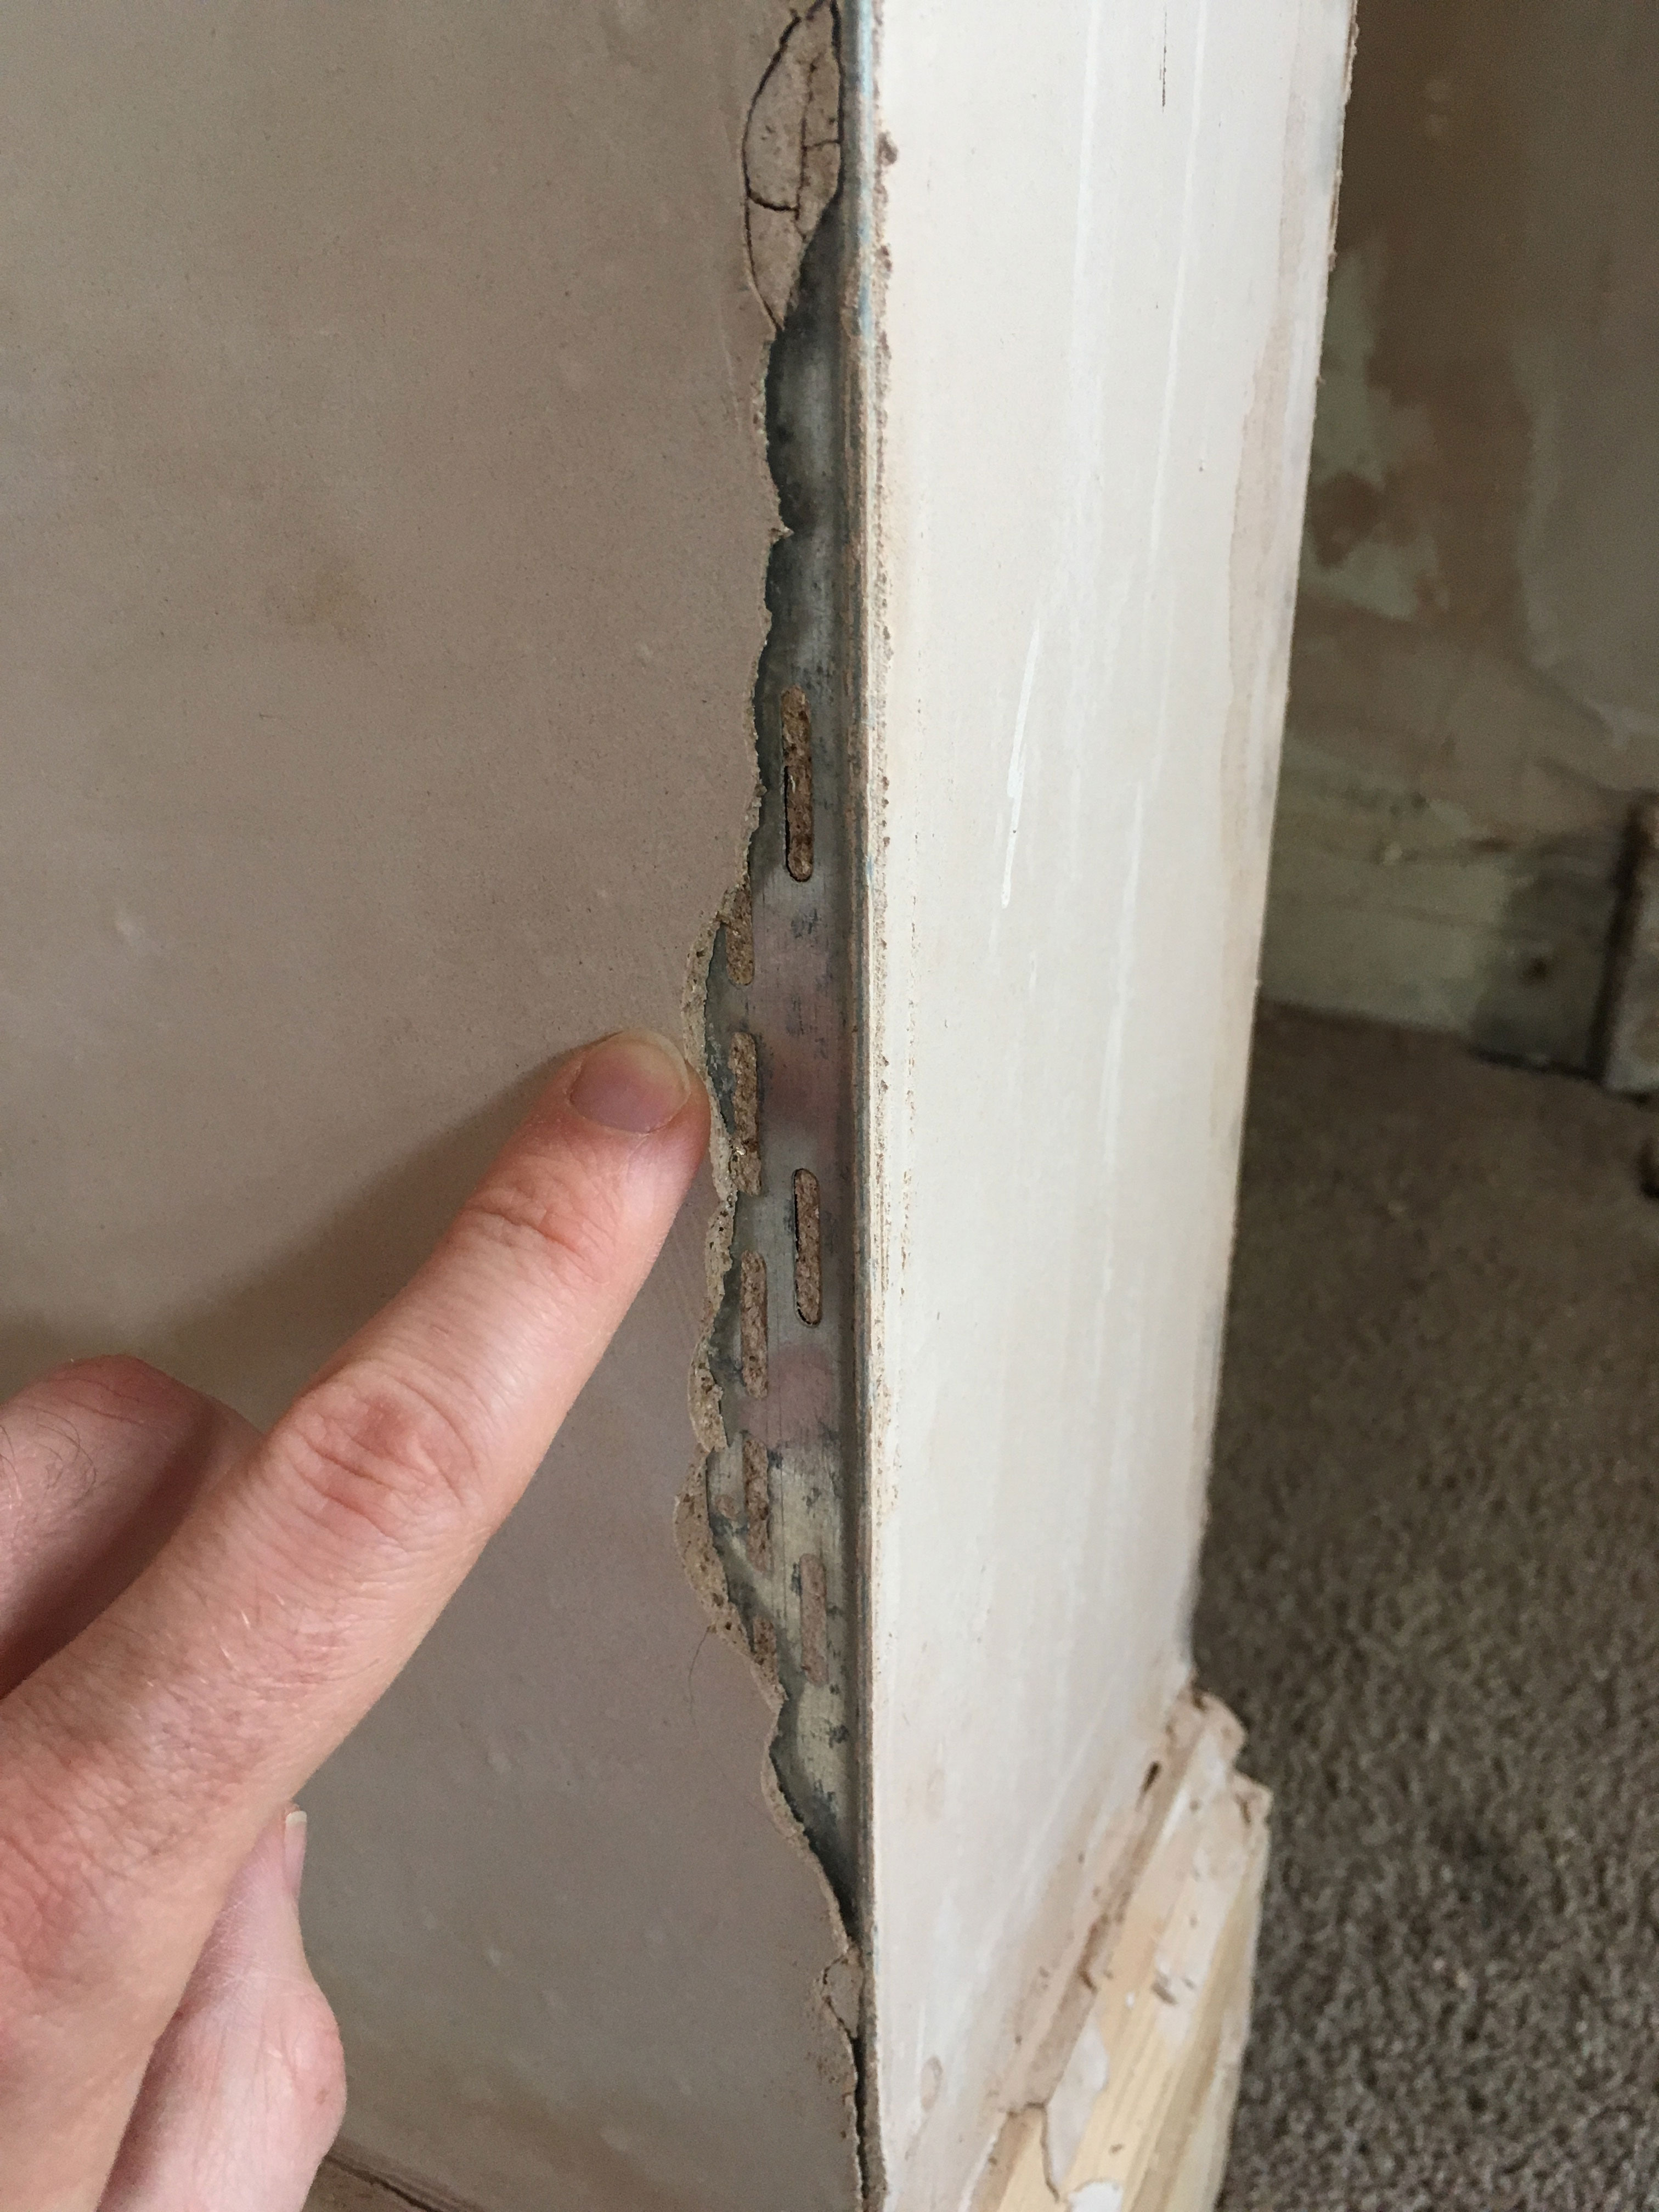 Plaster coming away from angle bead?